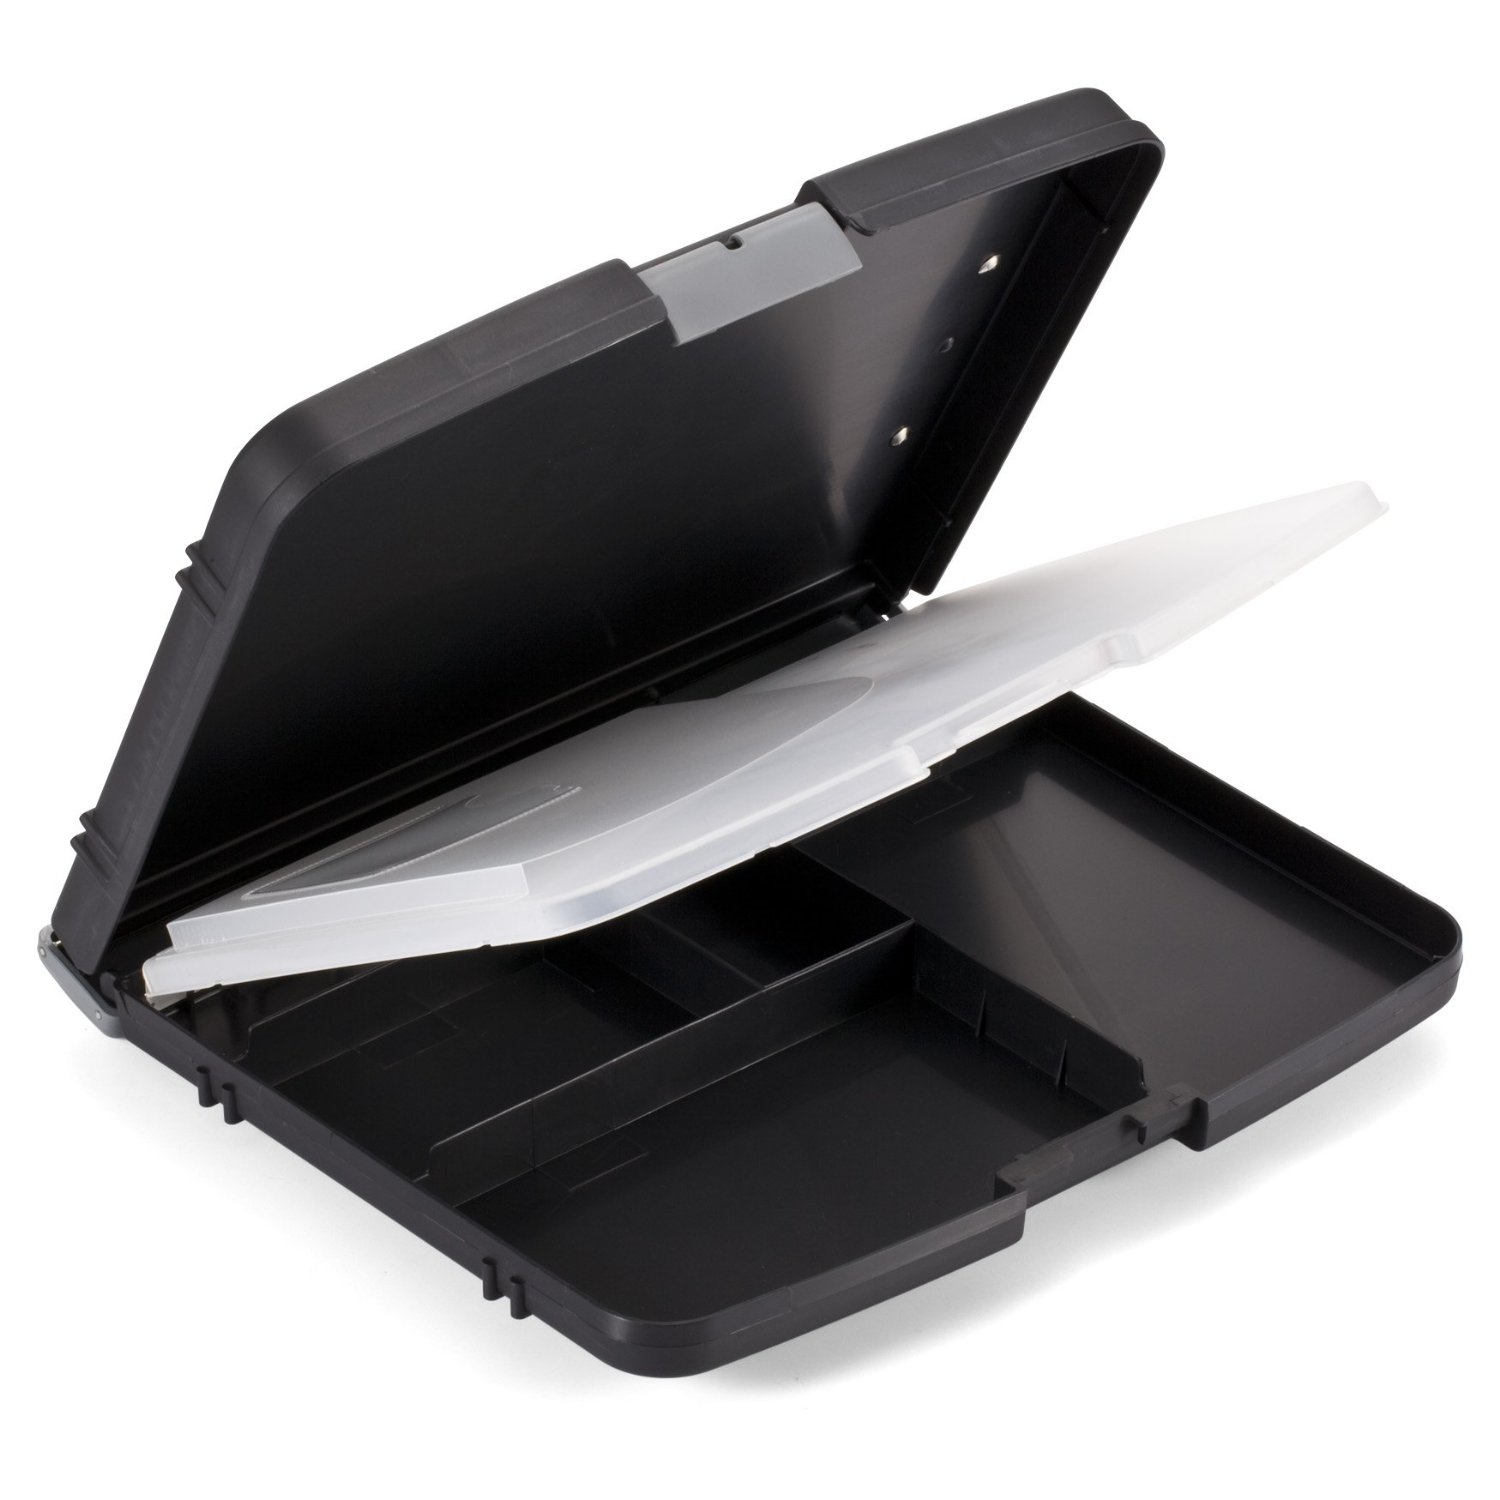 Holds 9w x 12h Black 3/4-Inch Capacity Officemate 83357 Recycled Plastic Forms Holder